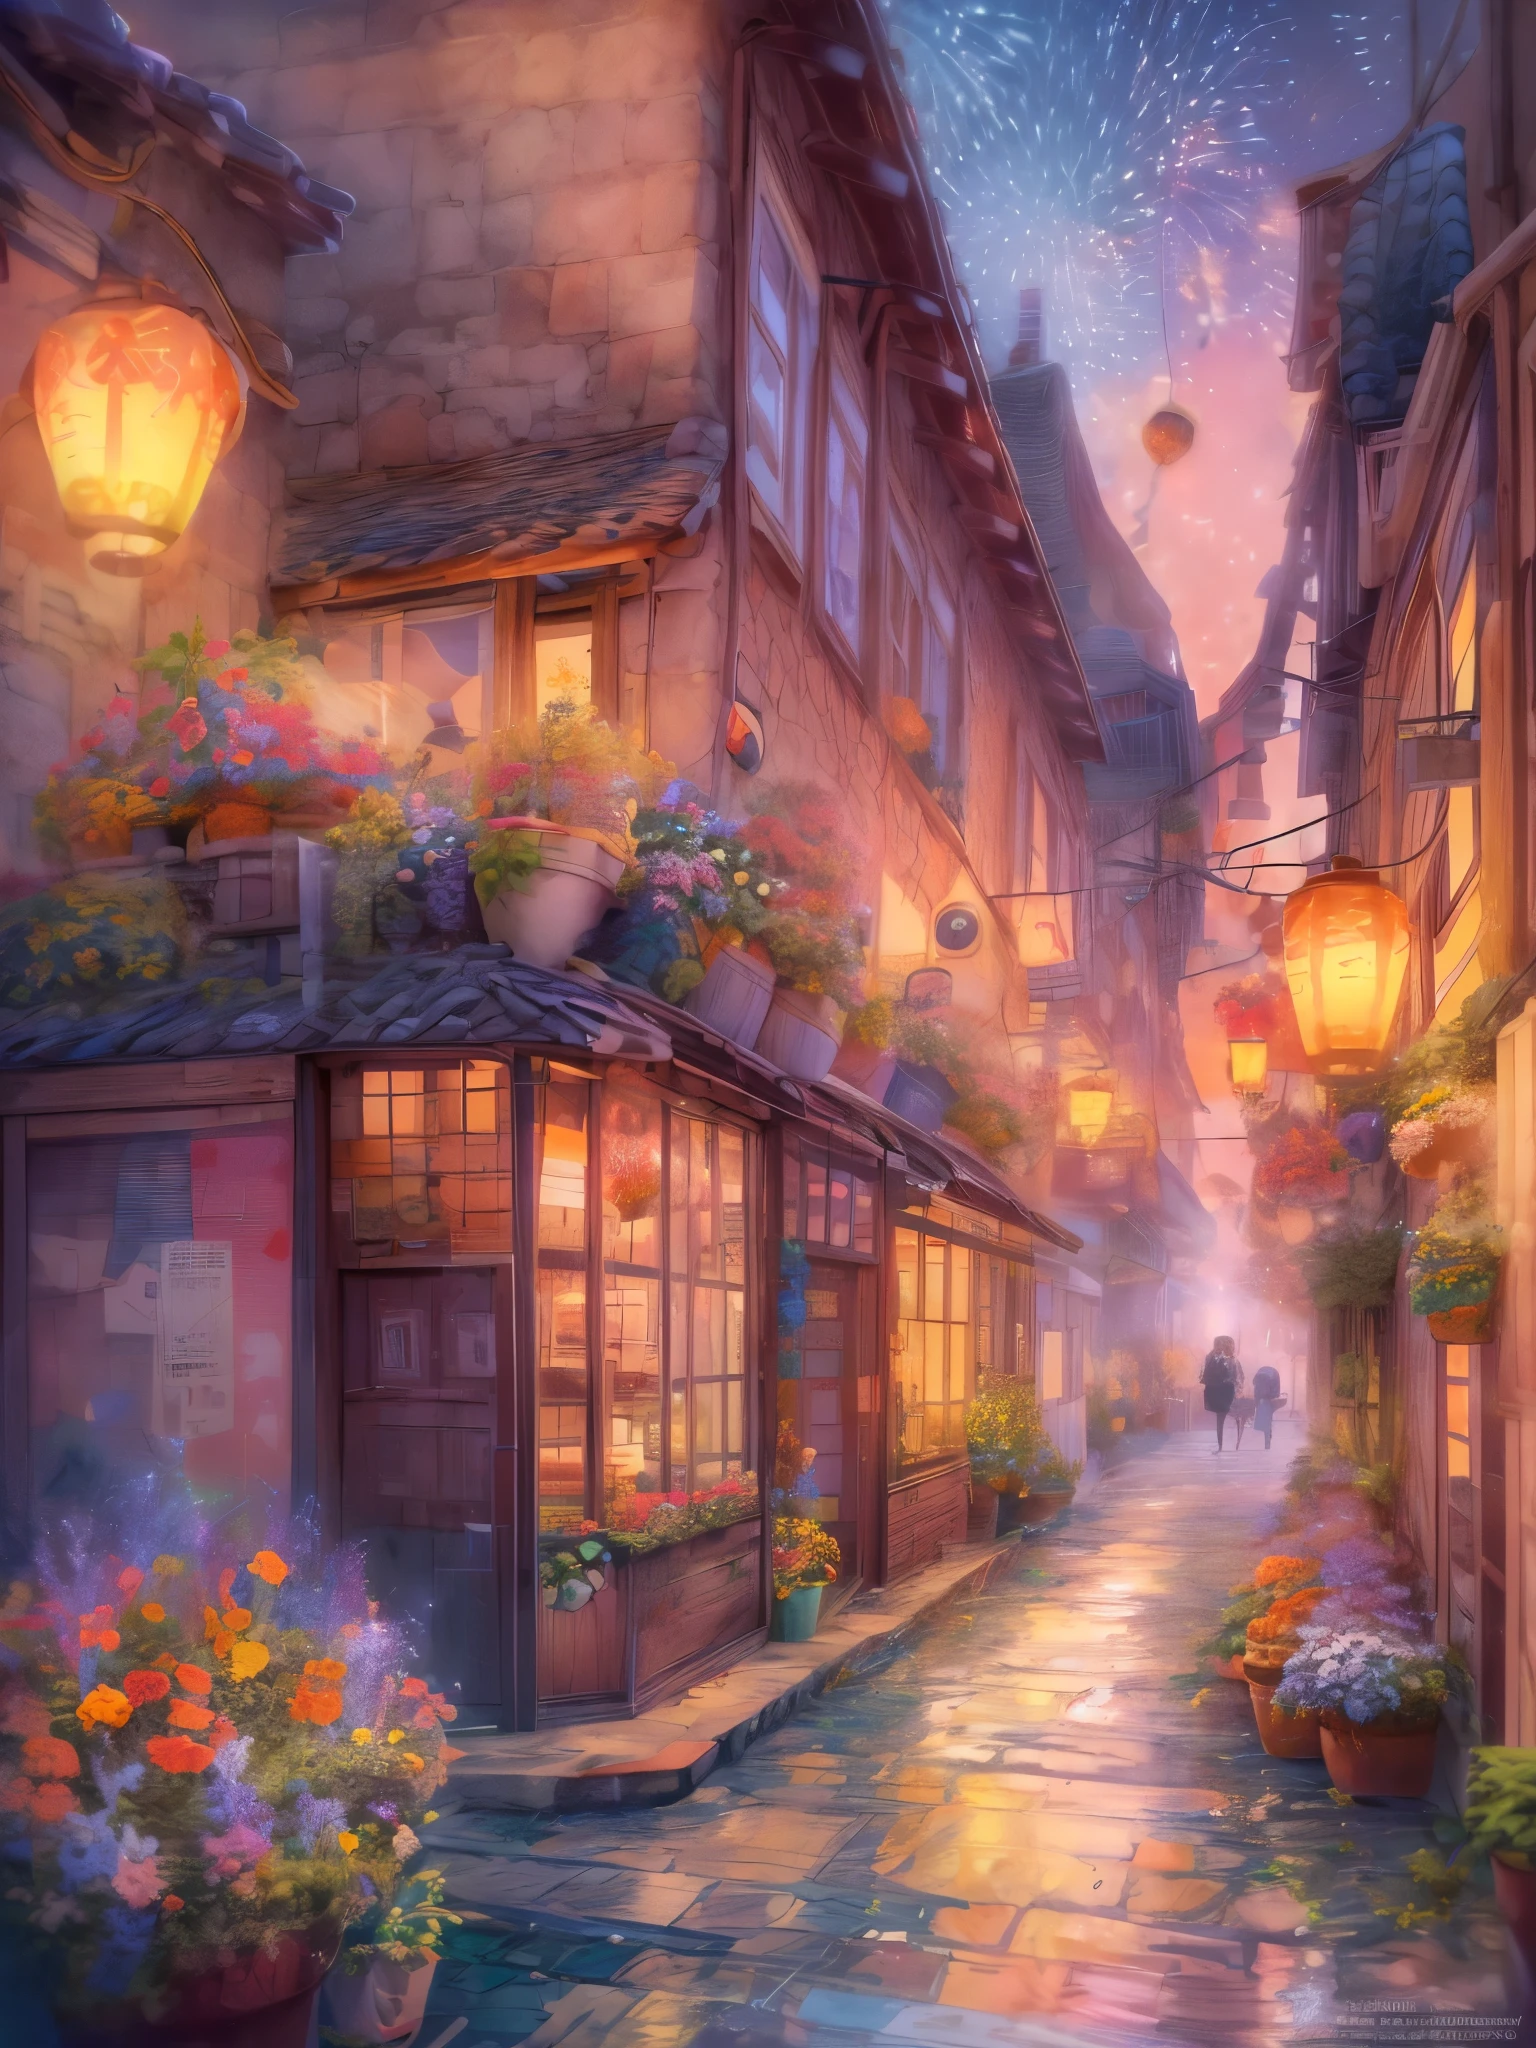 (Faraway view:1.8), ((at winter season))，(New Year&#39;s Day)，((fireworks in the night sky:1.7))，((Fireworks bloom，lots of fireworks))，Quaint European village，(corner flower shop:1.5)，beautiful  flowers，warmly lit，(Filled with many colorful lanterns and New Year decorations:1.8)，(Girl in down jacket standing on charming cobblestone street:1.2), Bathed in the warm glow of street lights，(Vines decorated with bright flowers climb up rustic buildings), Create scenes with natural beauty，The air is filled with the scent of fresh flowers from a nearby flower shop，(Depicted in delicate vector illustration style and flat style)，HighestQuali，8k，A high resolution，tmasterpiece：1.2，ultra - detailed，high dynamic range imaging，hyper HD，Studio lighting，hyperdetailed painting，Sharp focus，physically-based renderingt，Extremely detailed description，professinal，vivd colour，styled：Vector illustration